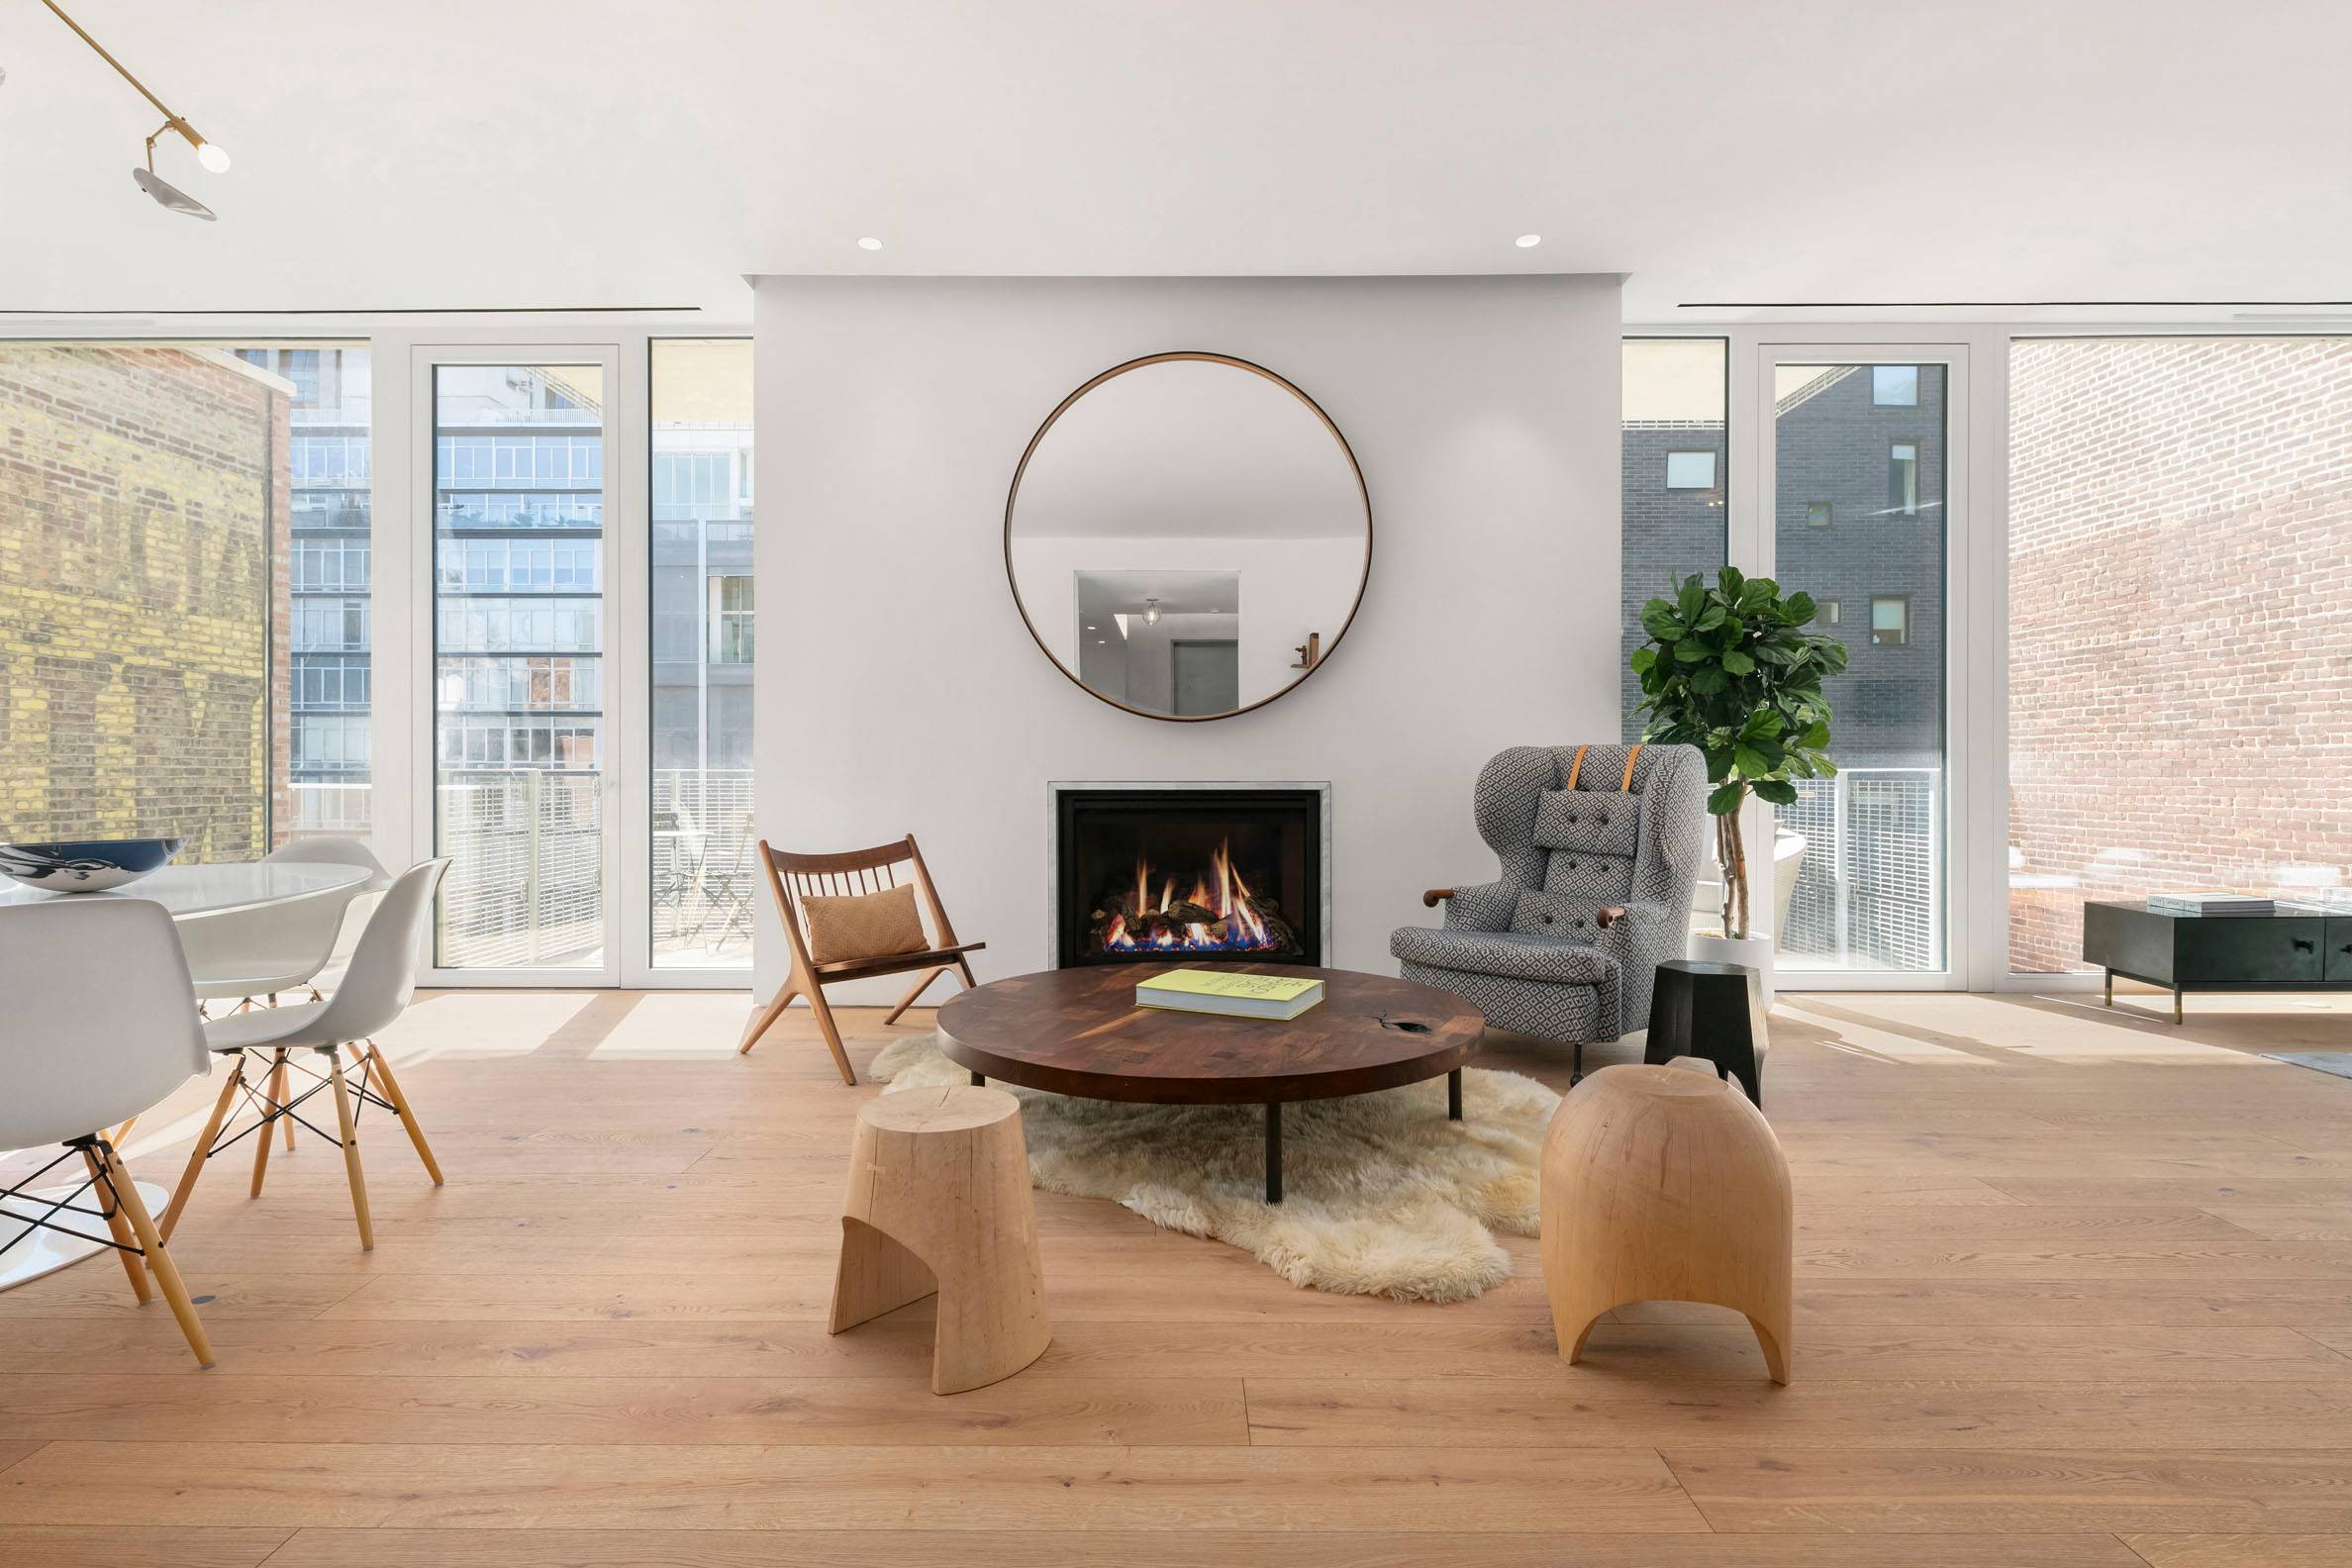 IMMEDIATE OCCUPANCY Residence 6 at 532 West 20th Street is an exquisitely crafted 2, 703 SF full floor, 3 Bedroom, 3 Full Bath and Half Bath featuring a 155 SF ...